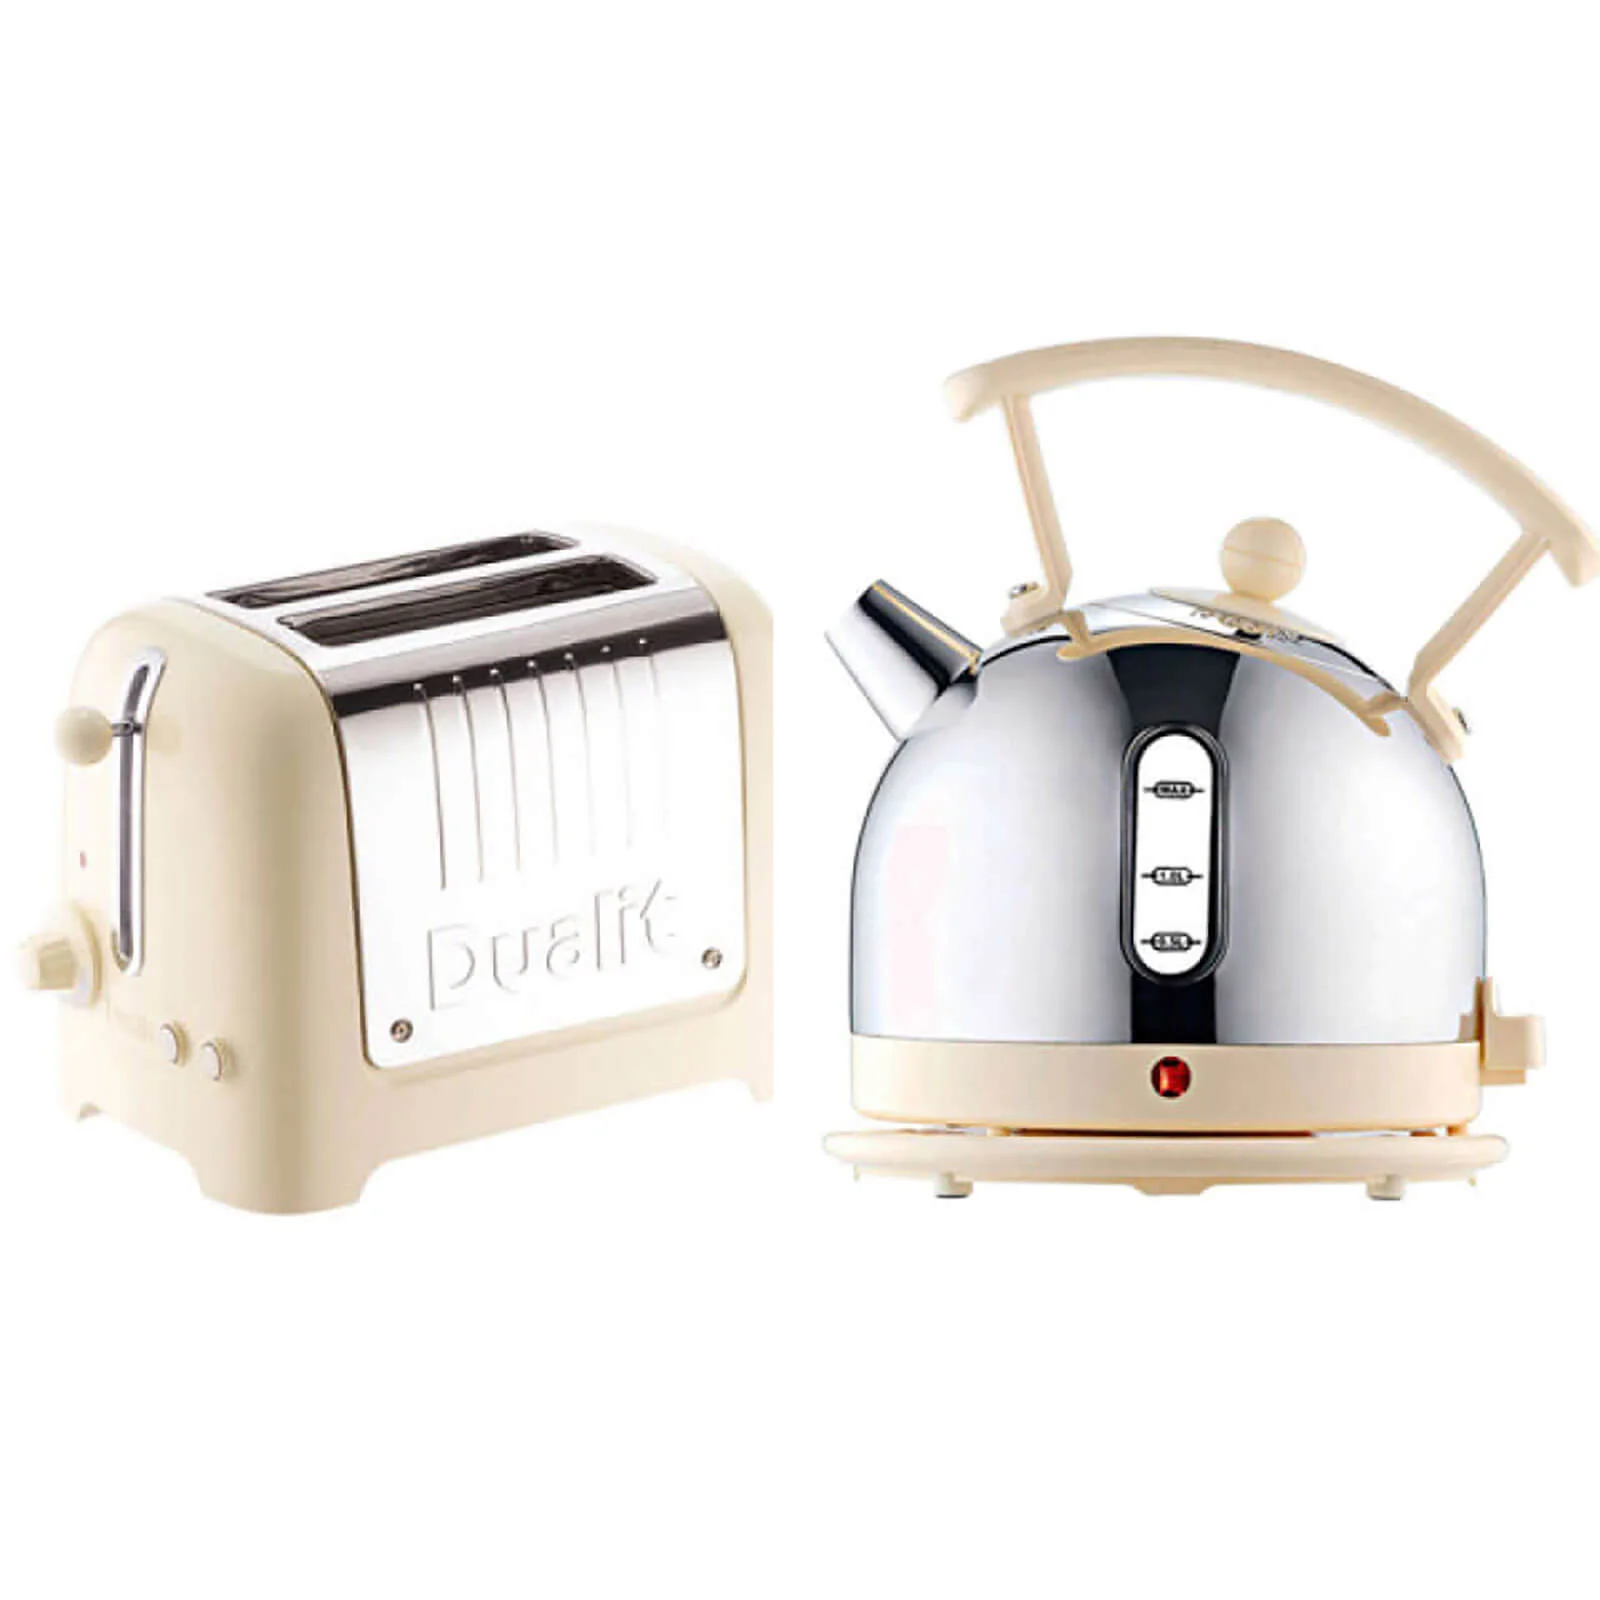 Dualit Dome Kettle and 2 Slot Toaster Bundle - Cream Image 1